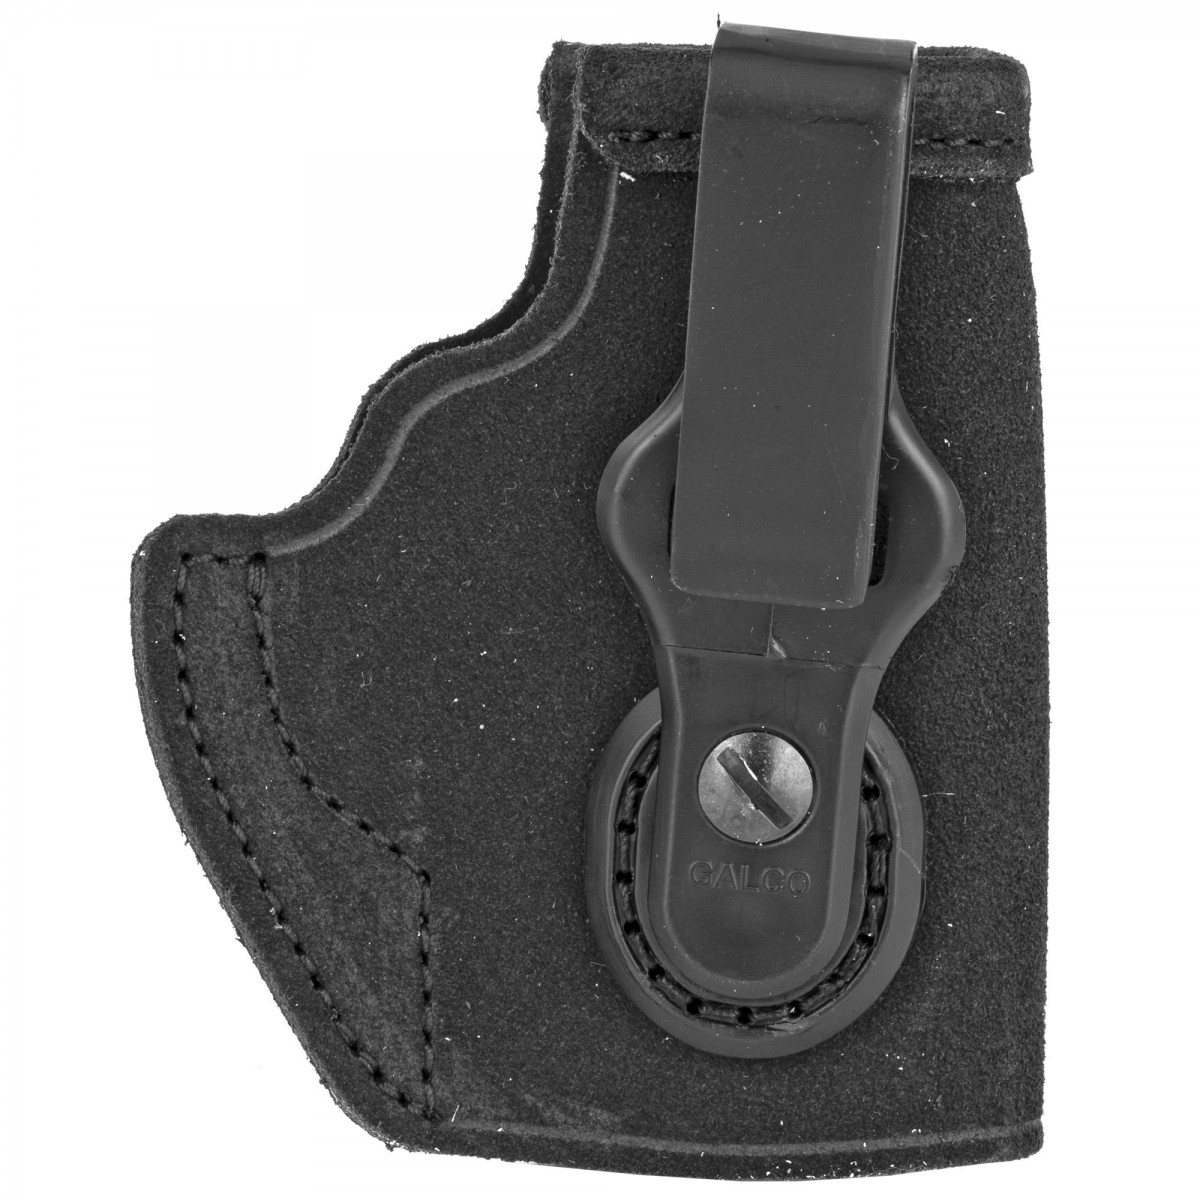 Galco Tuck-N-Go 2.0 IWB Ambidextrous Holster for Ruger LCP II / LCP MAX